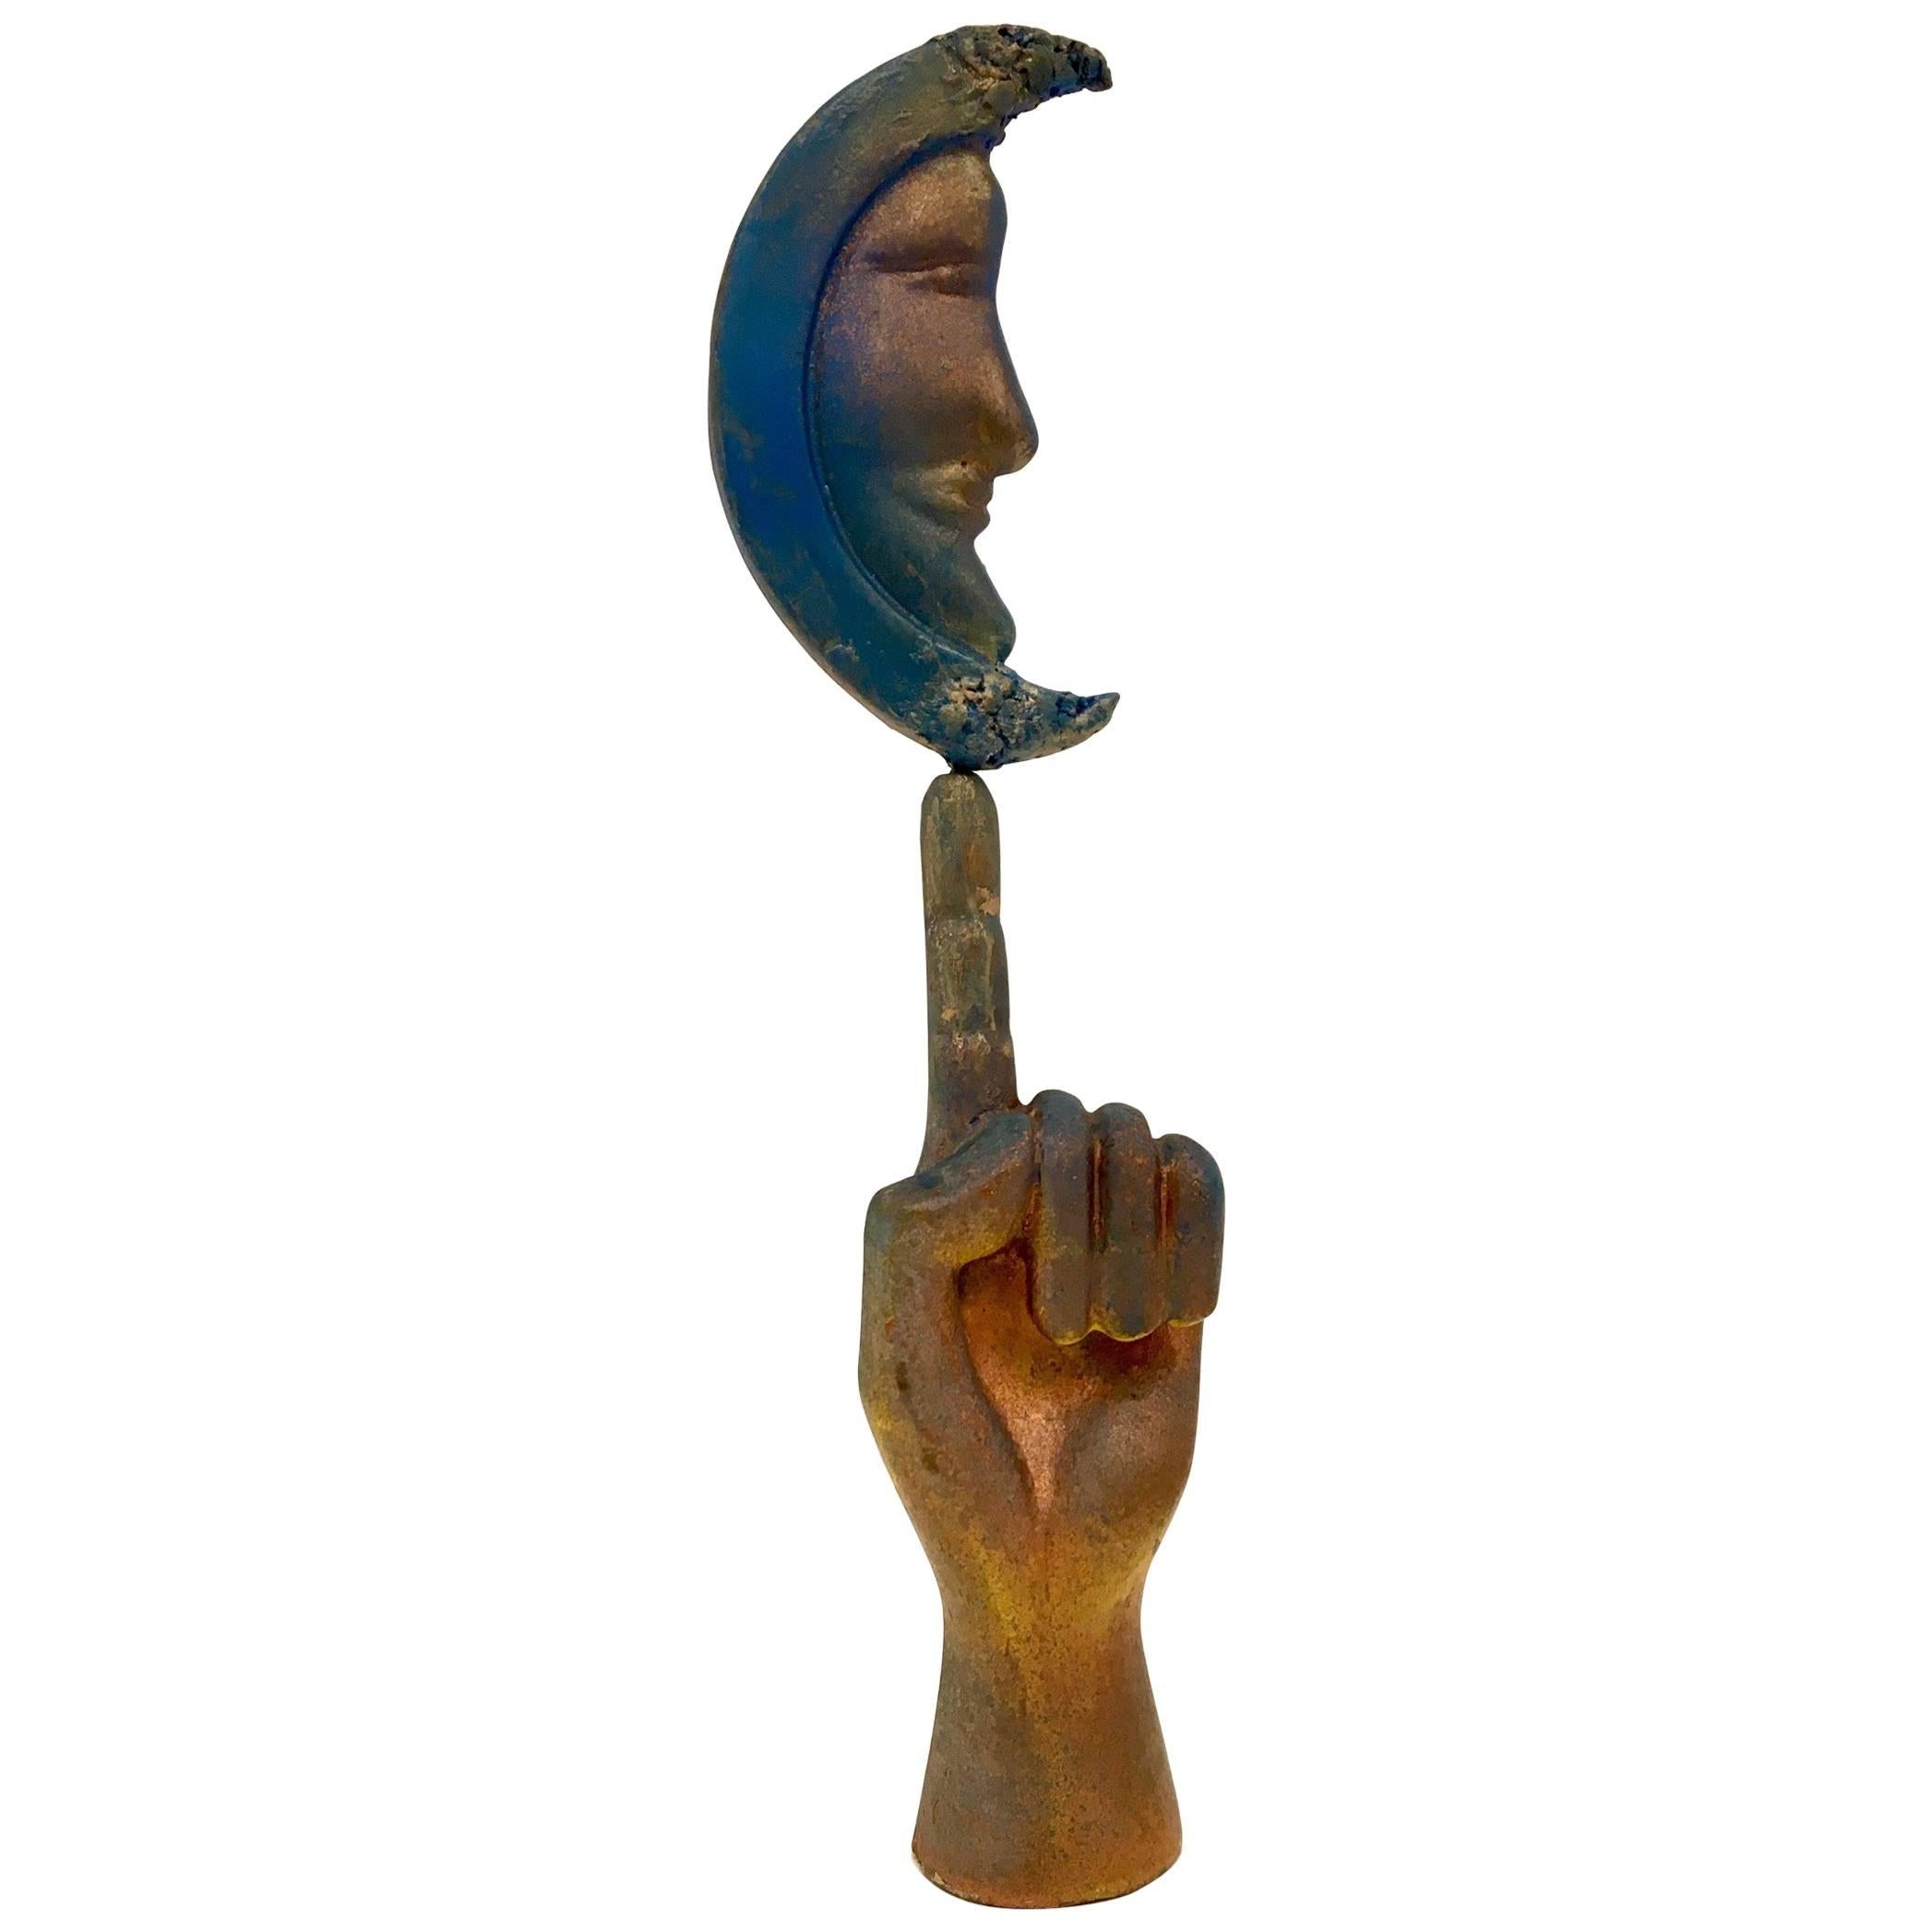 Rare Early Production Hand and Moon Painted Wood Sculpture by Pedro Friedeberg